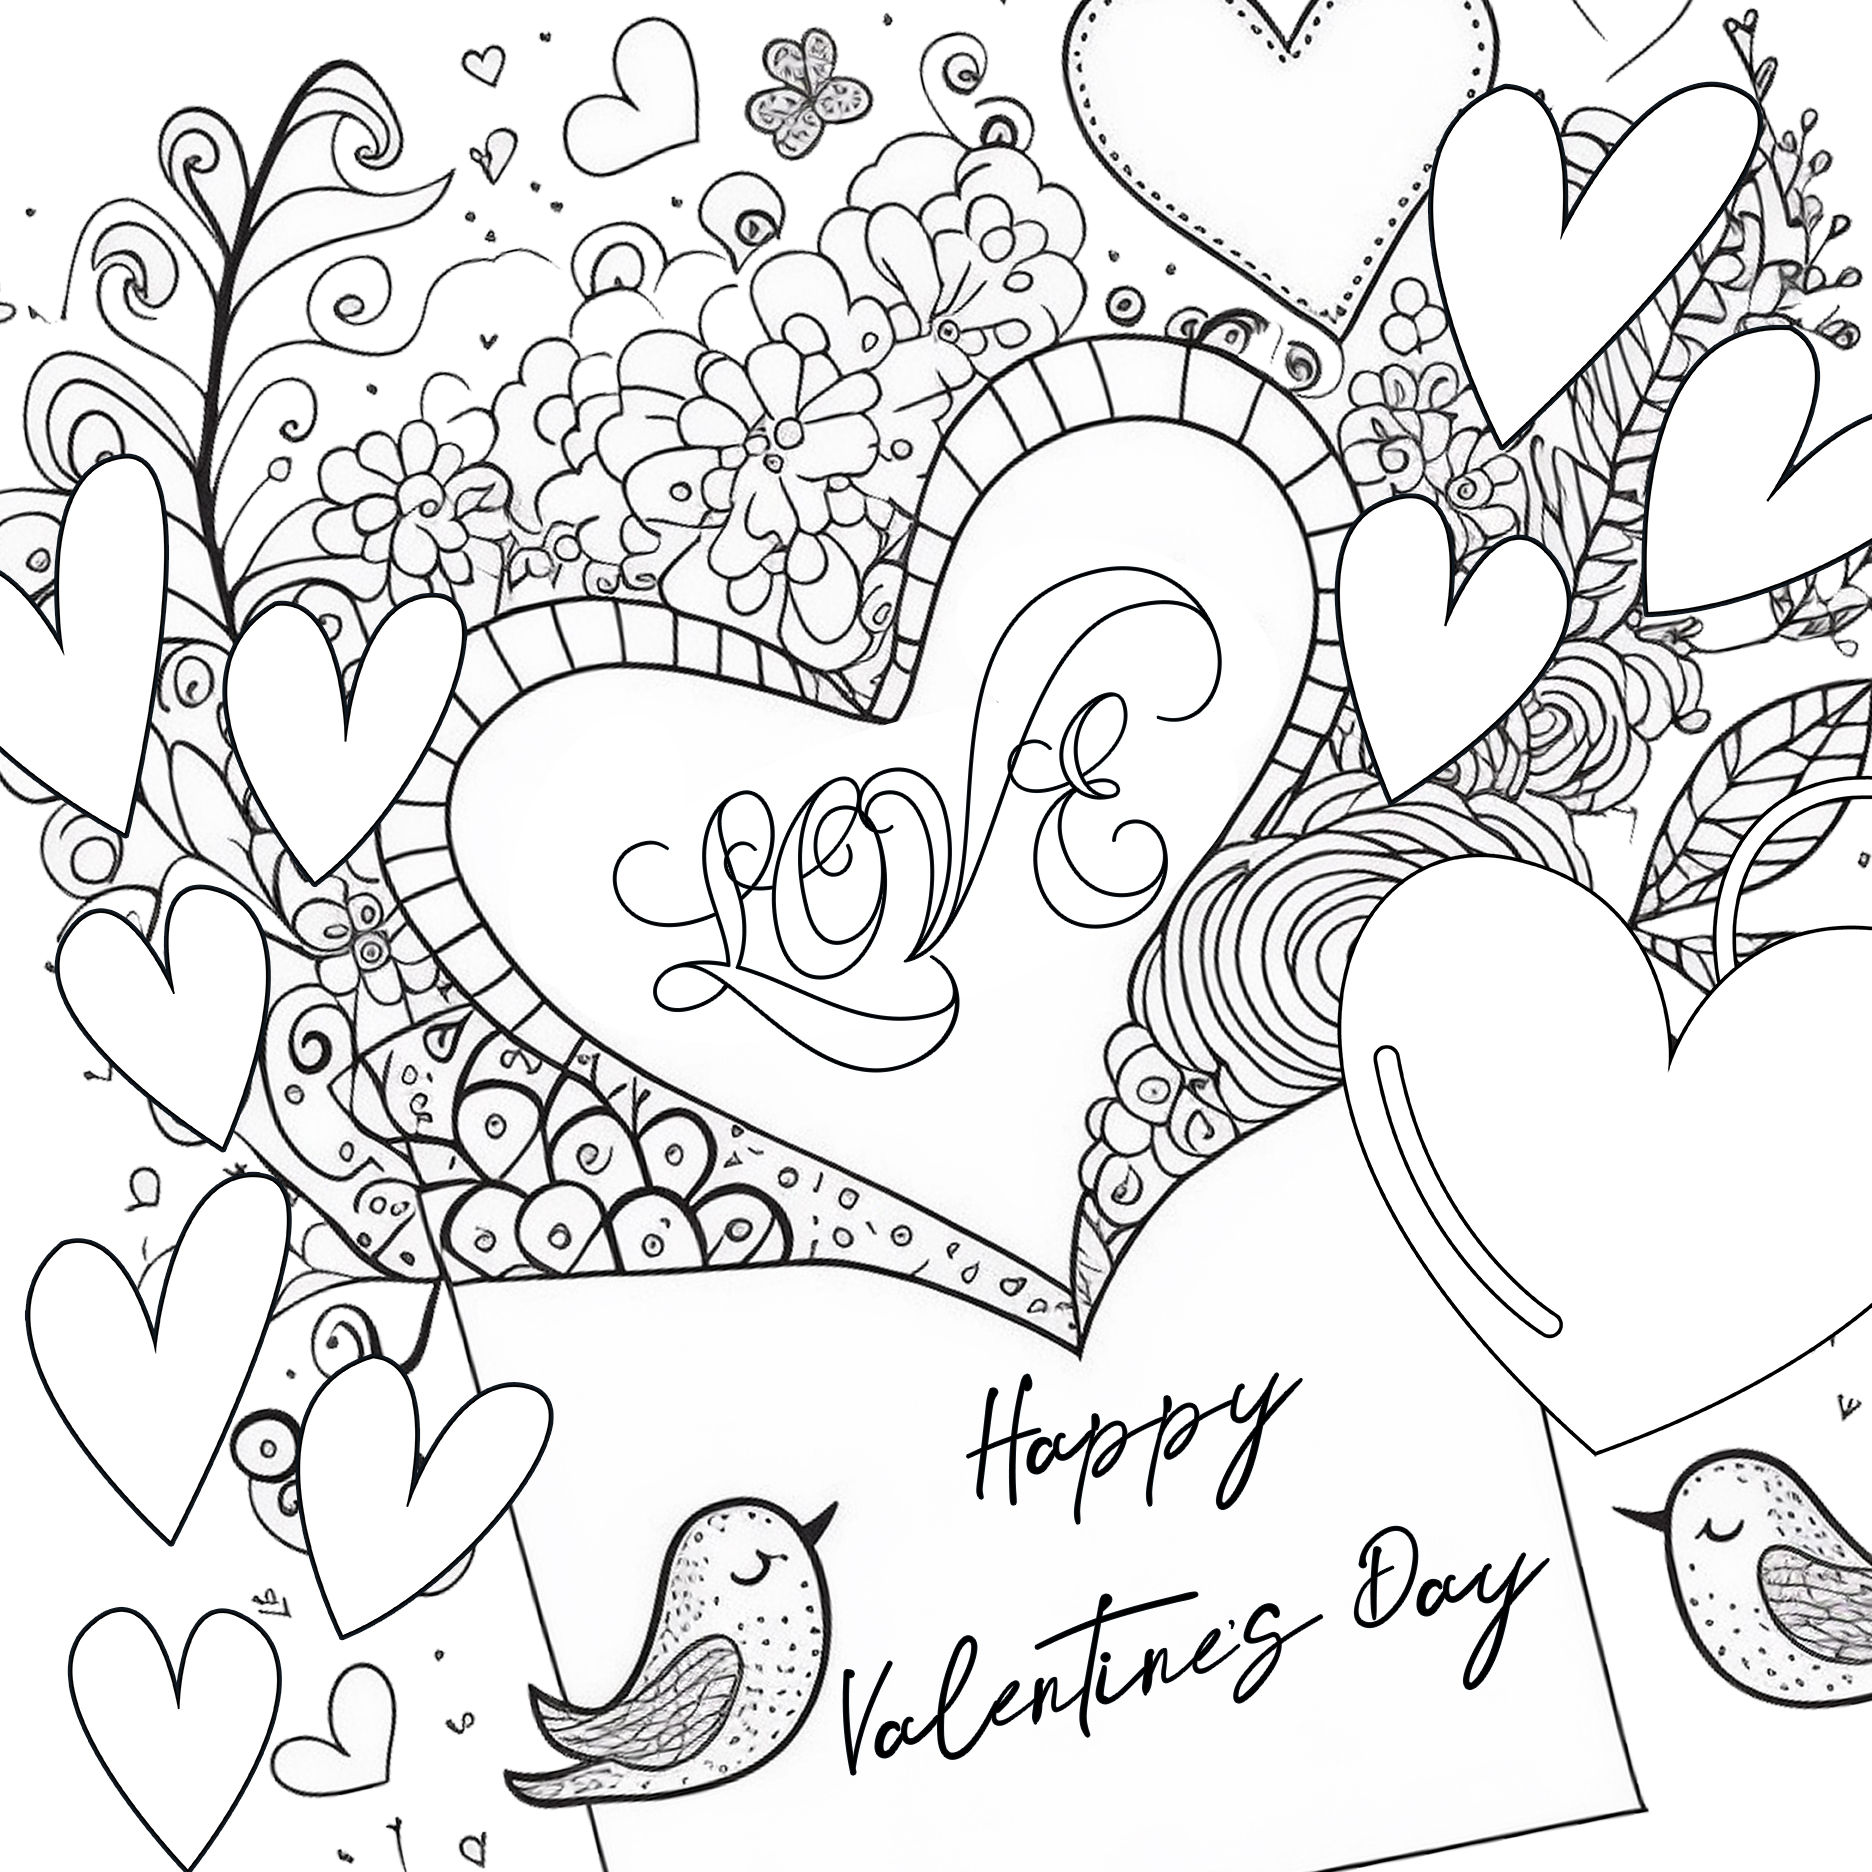 printable valentine's day love coloring card